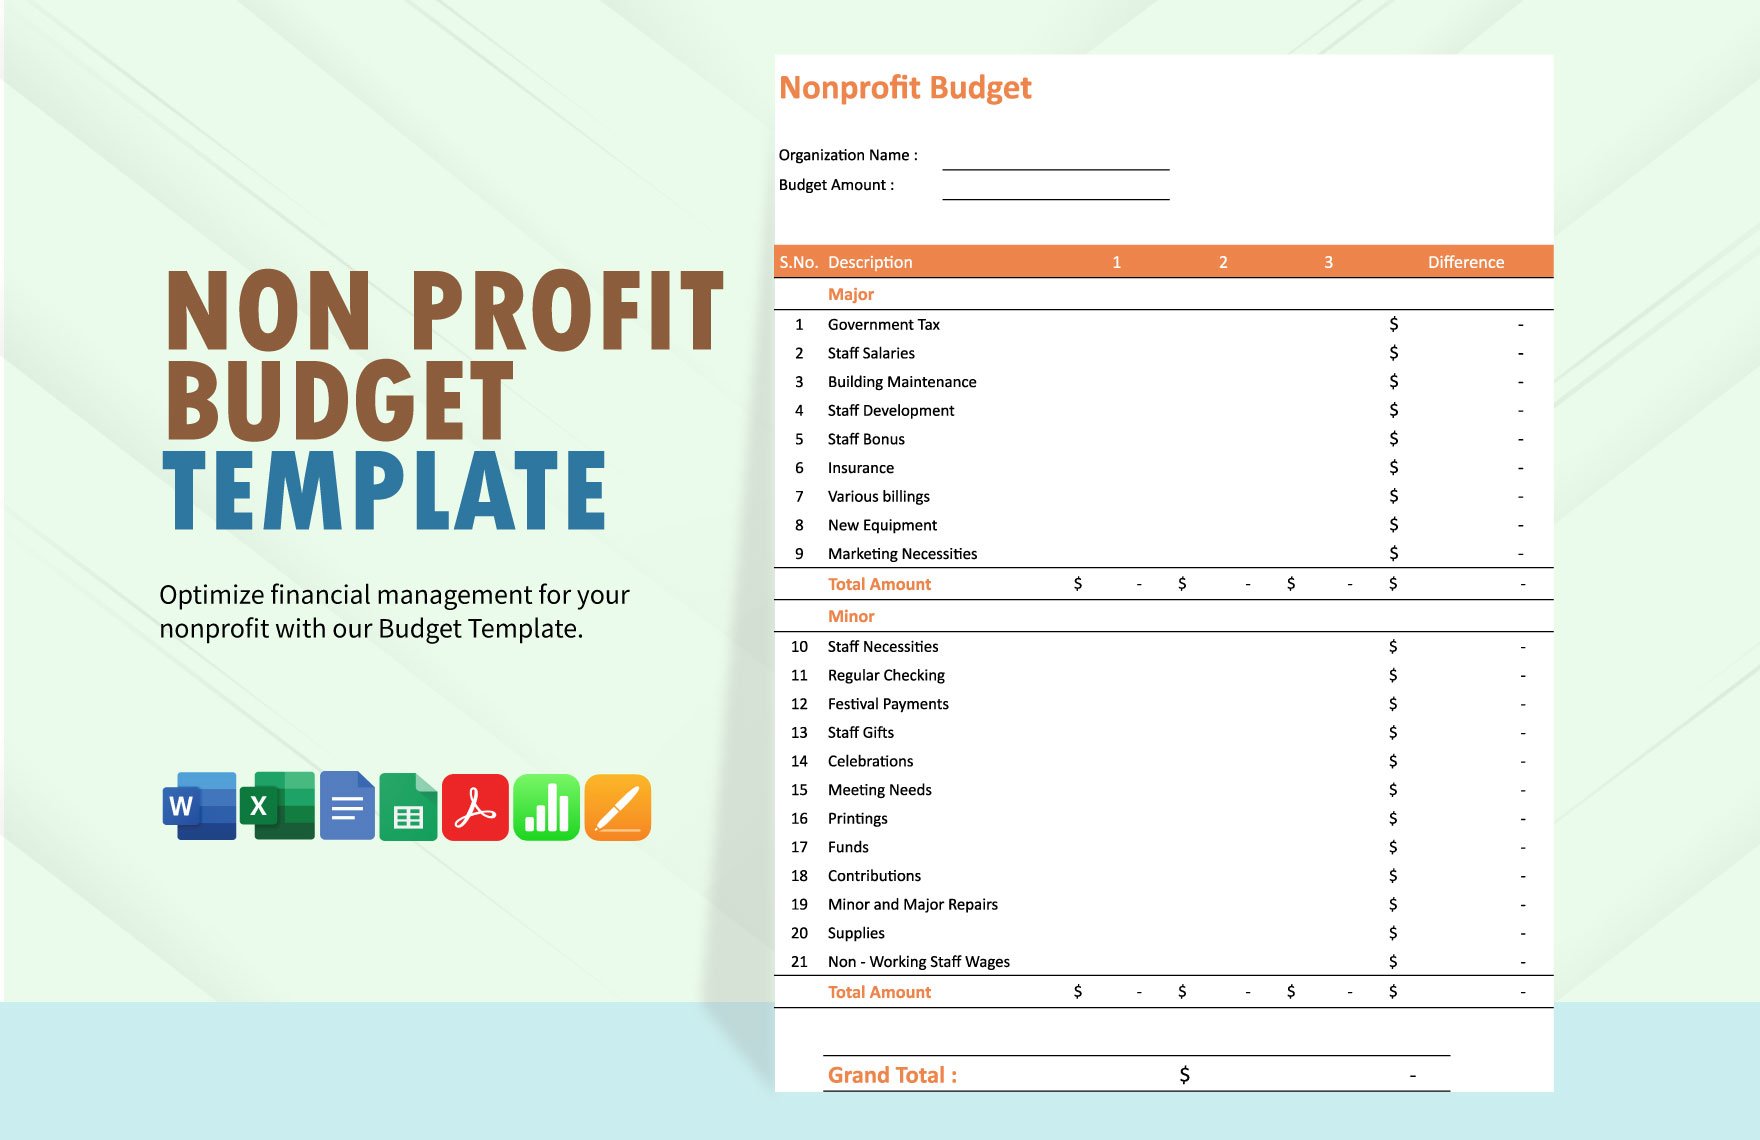 Non Profit Budget Template in Word, Google Docs, Excel, PDF, Google Sheets, Apple Pages, Apple Numbers